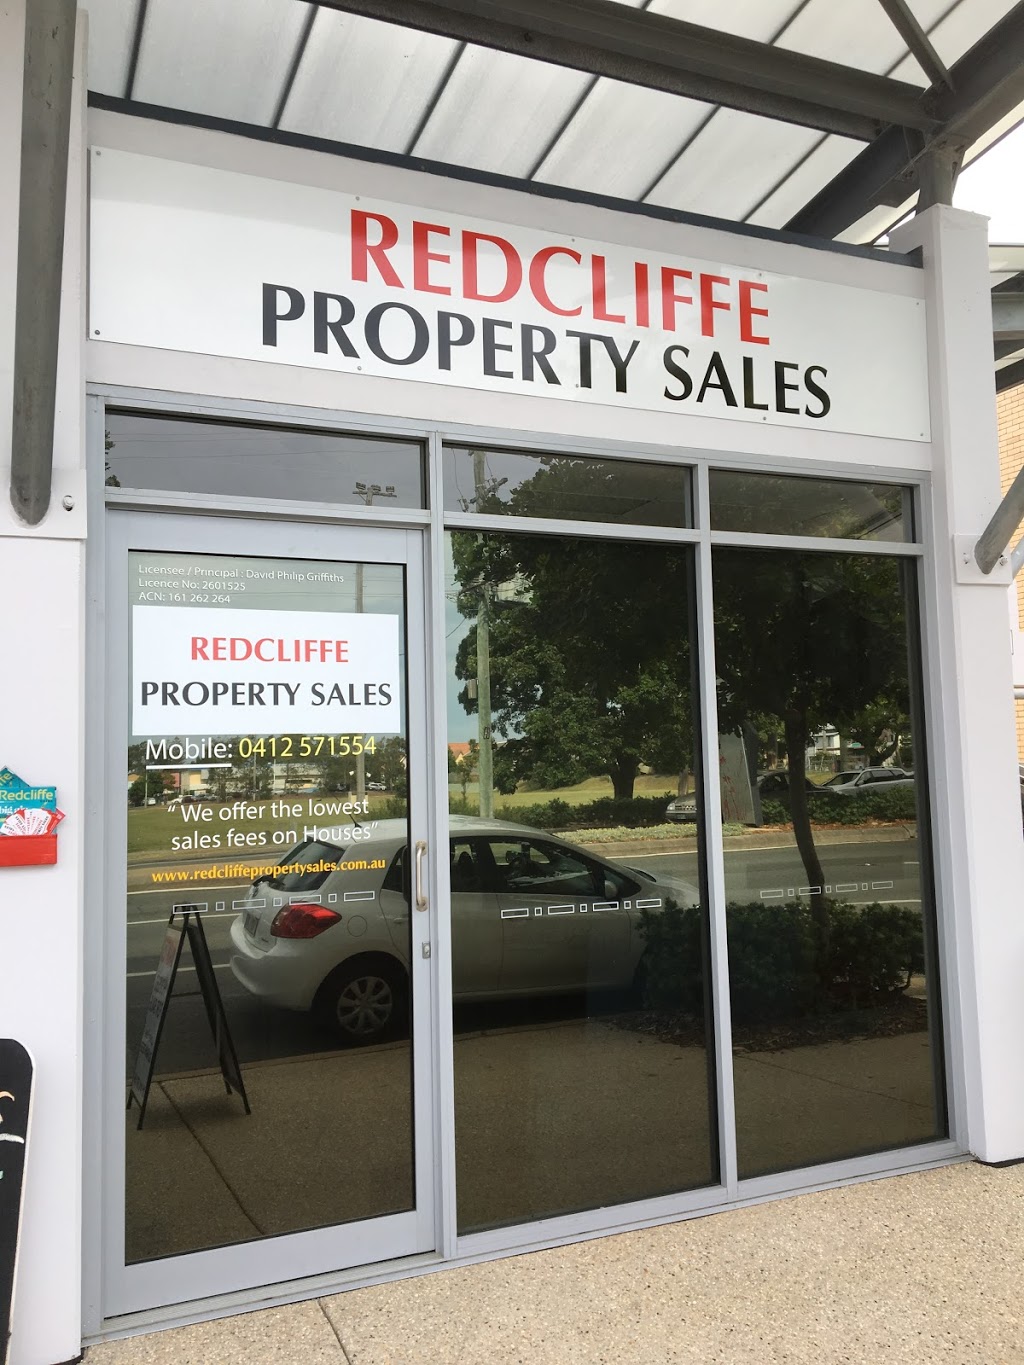 REDCLIFFE PROPERTY SALES | 249 Oxley Avenue Margate, Redcliffe QLD 4019, Australia | Phone: 0412 571 554